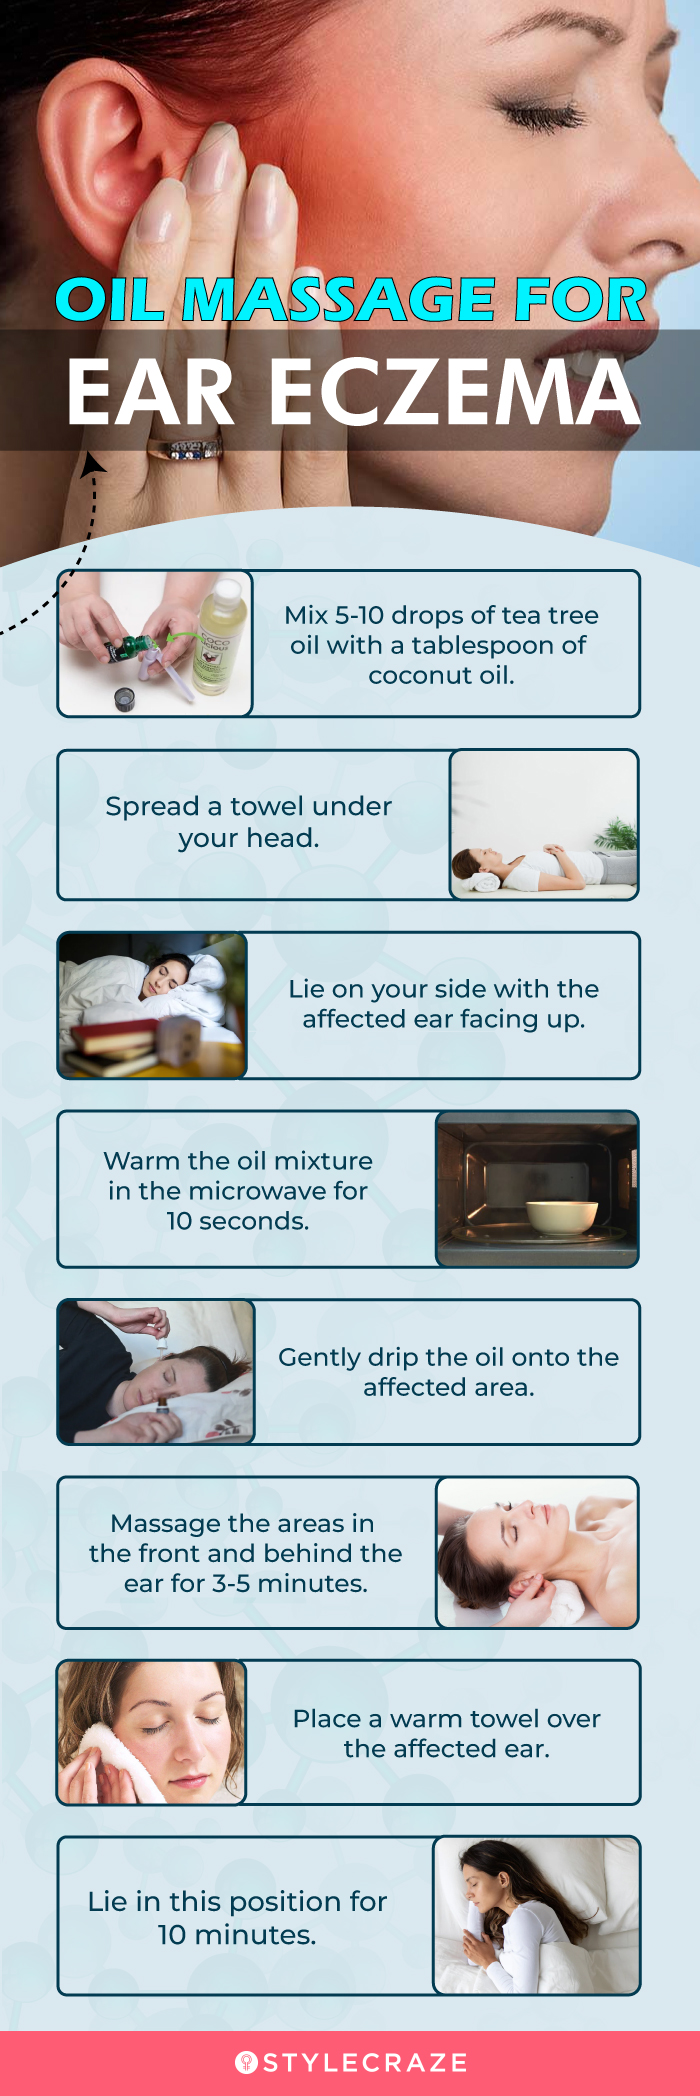 oil massage for ear eczema (infographic)